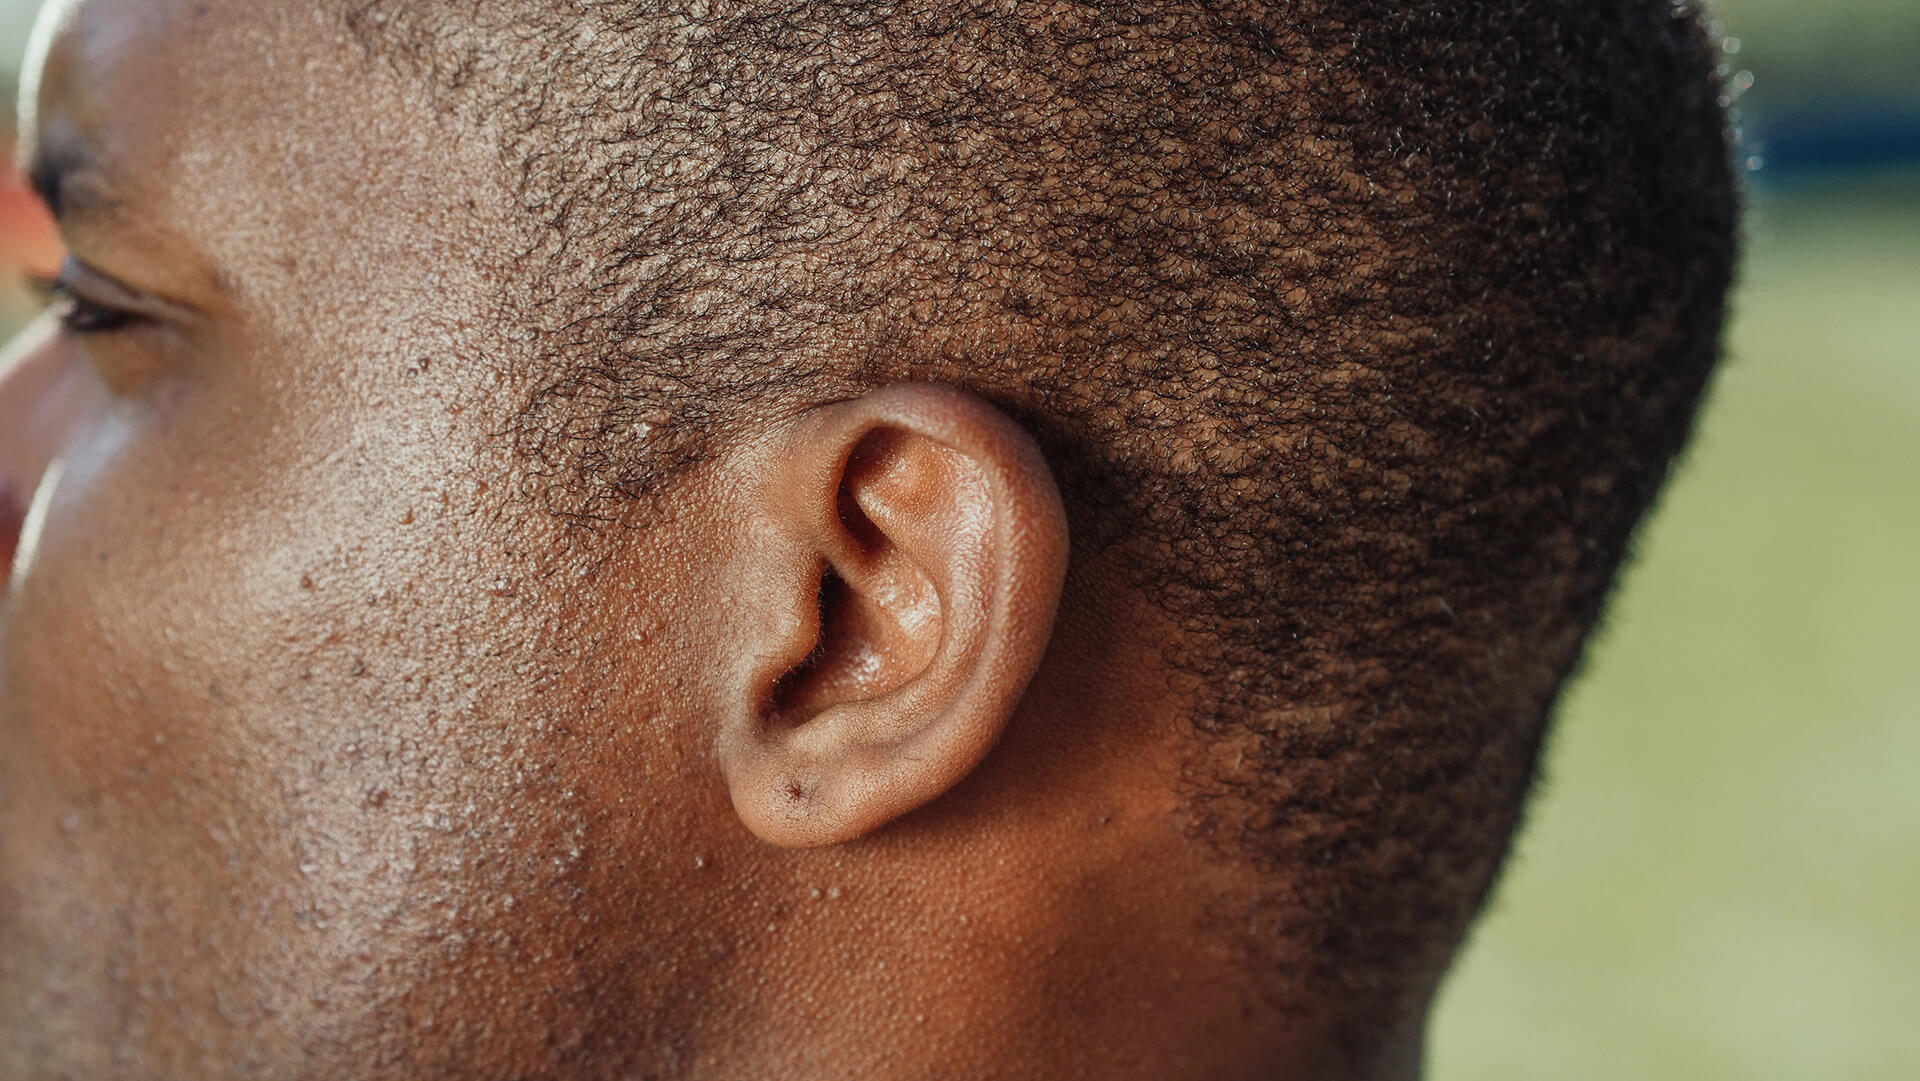 What Level of Hearing Loss is Considered a Disability?